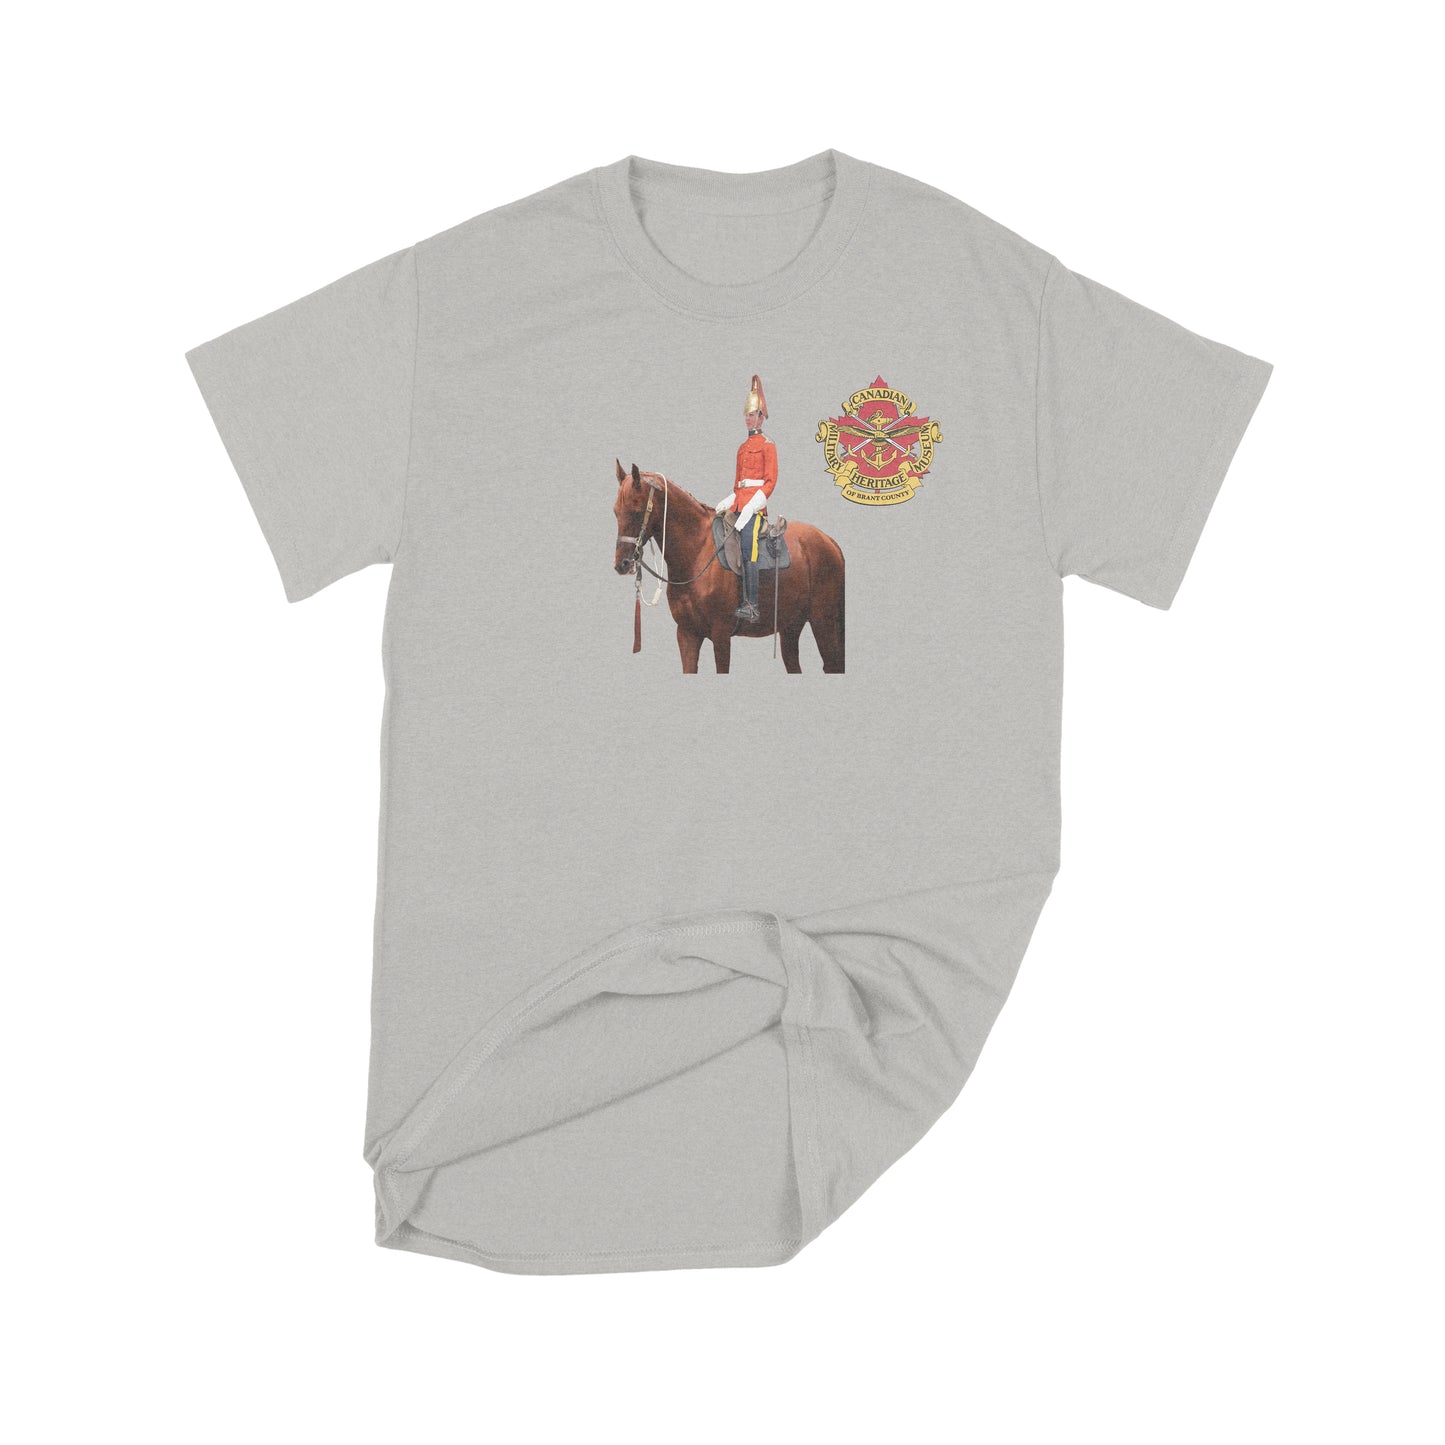 Brantford, Canadian Military Heritage Museum, Fat Dave, Mounted Dragoon, Museum, T-Shirt, Grey